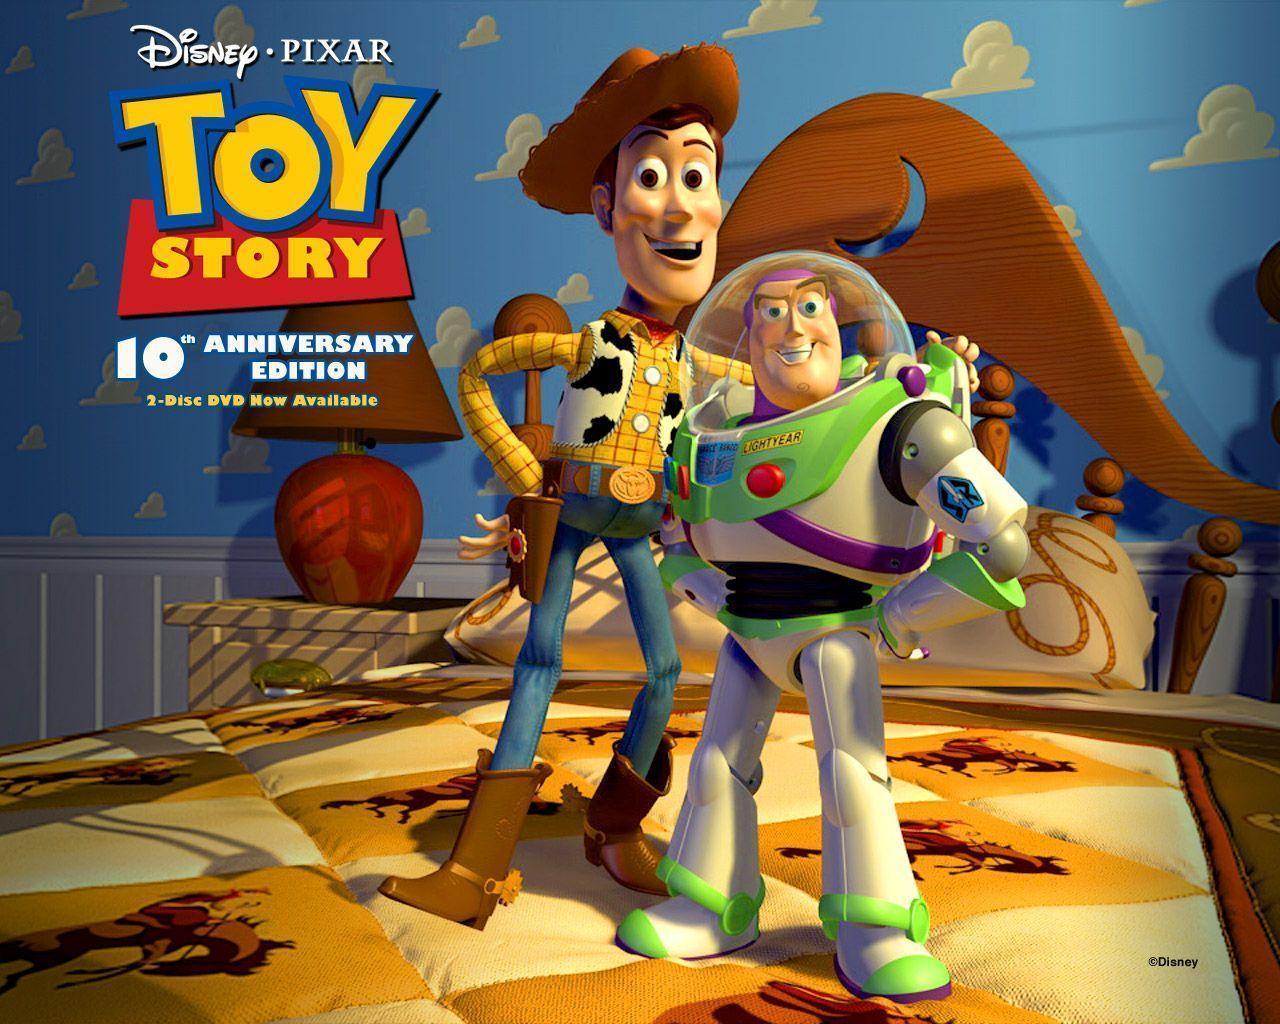 Sponsored blog&toy story wallpapers